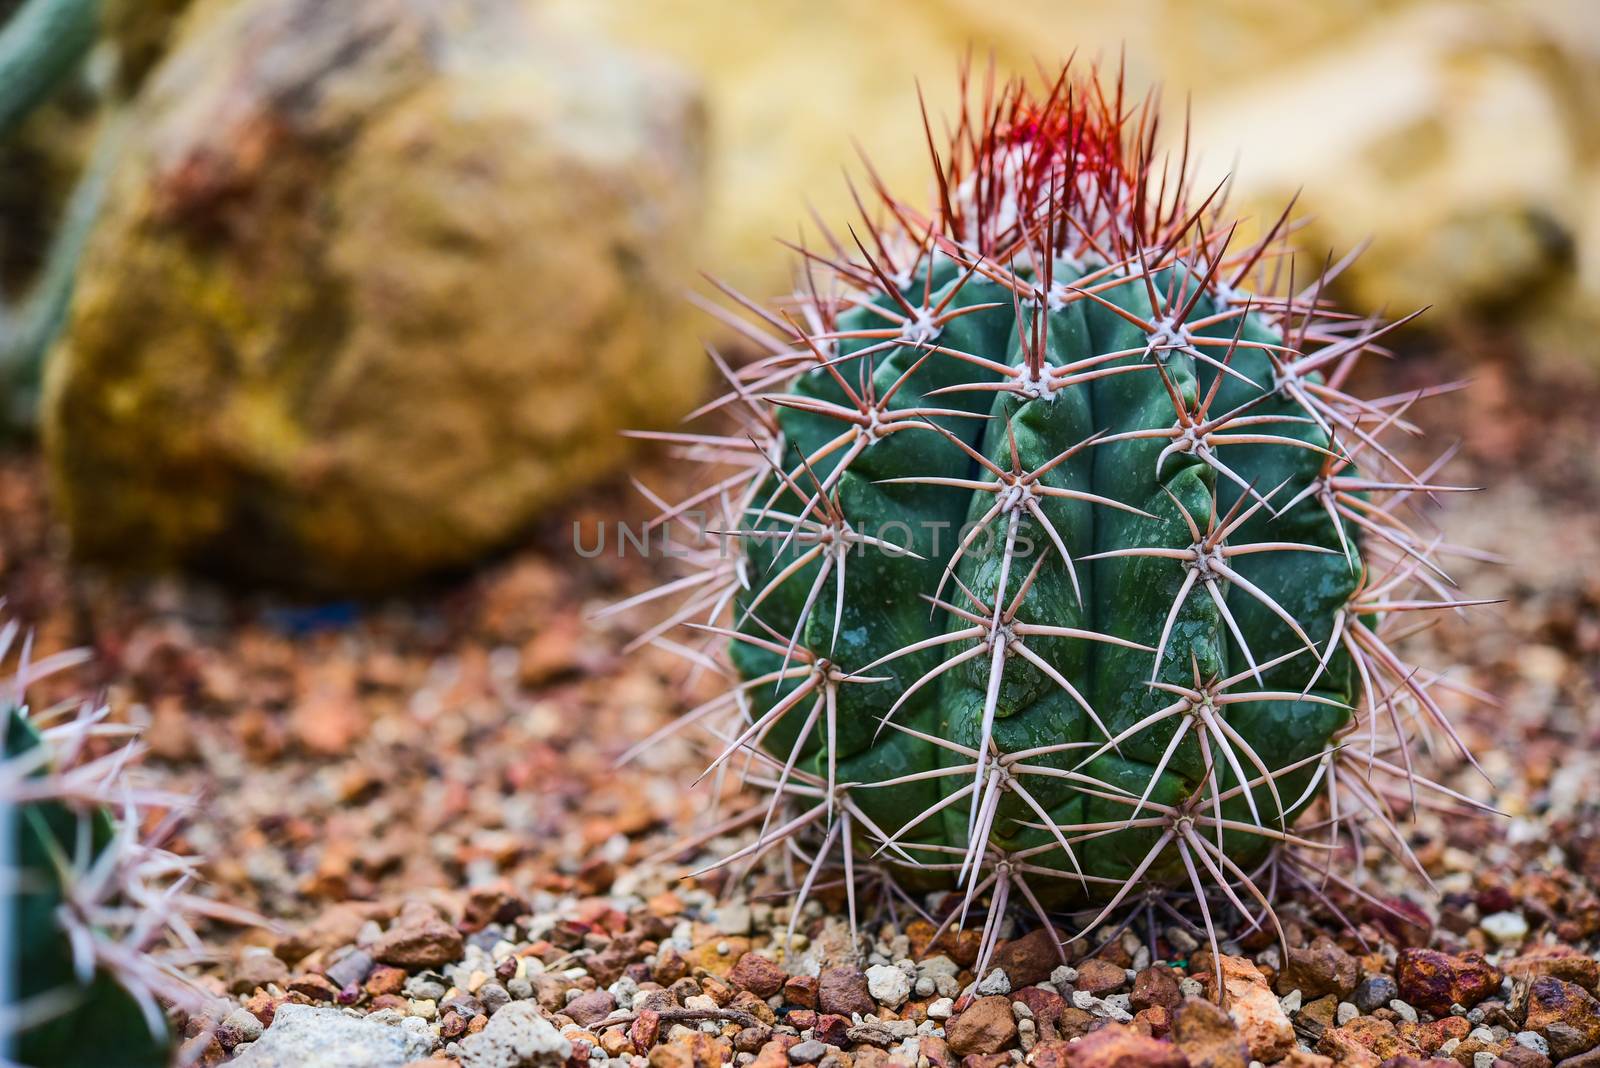 Cactus held in a garden that looks arid by photobyphotoboy